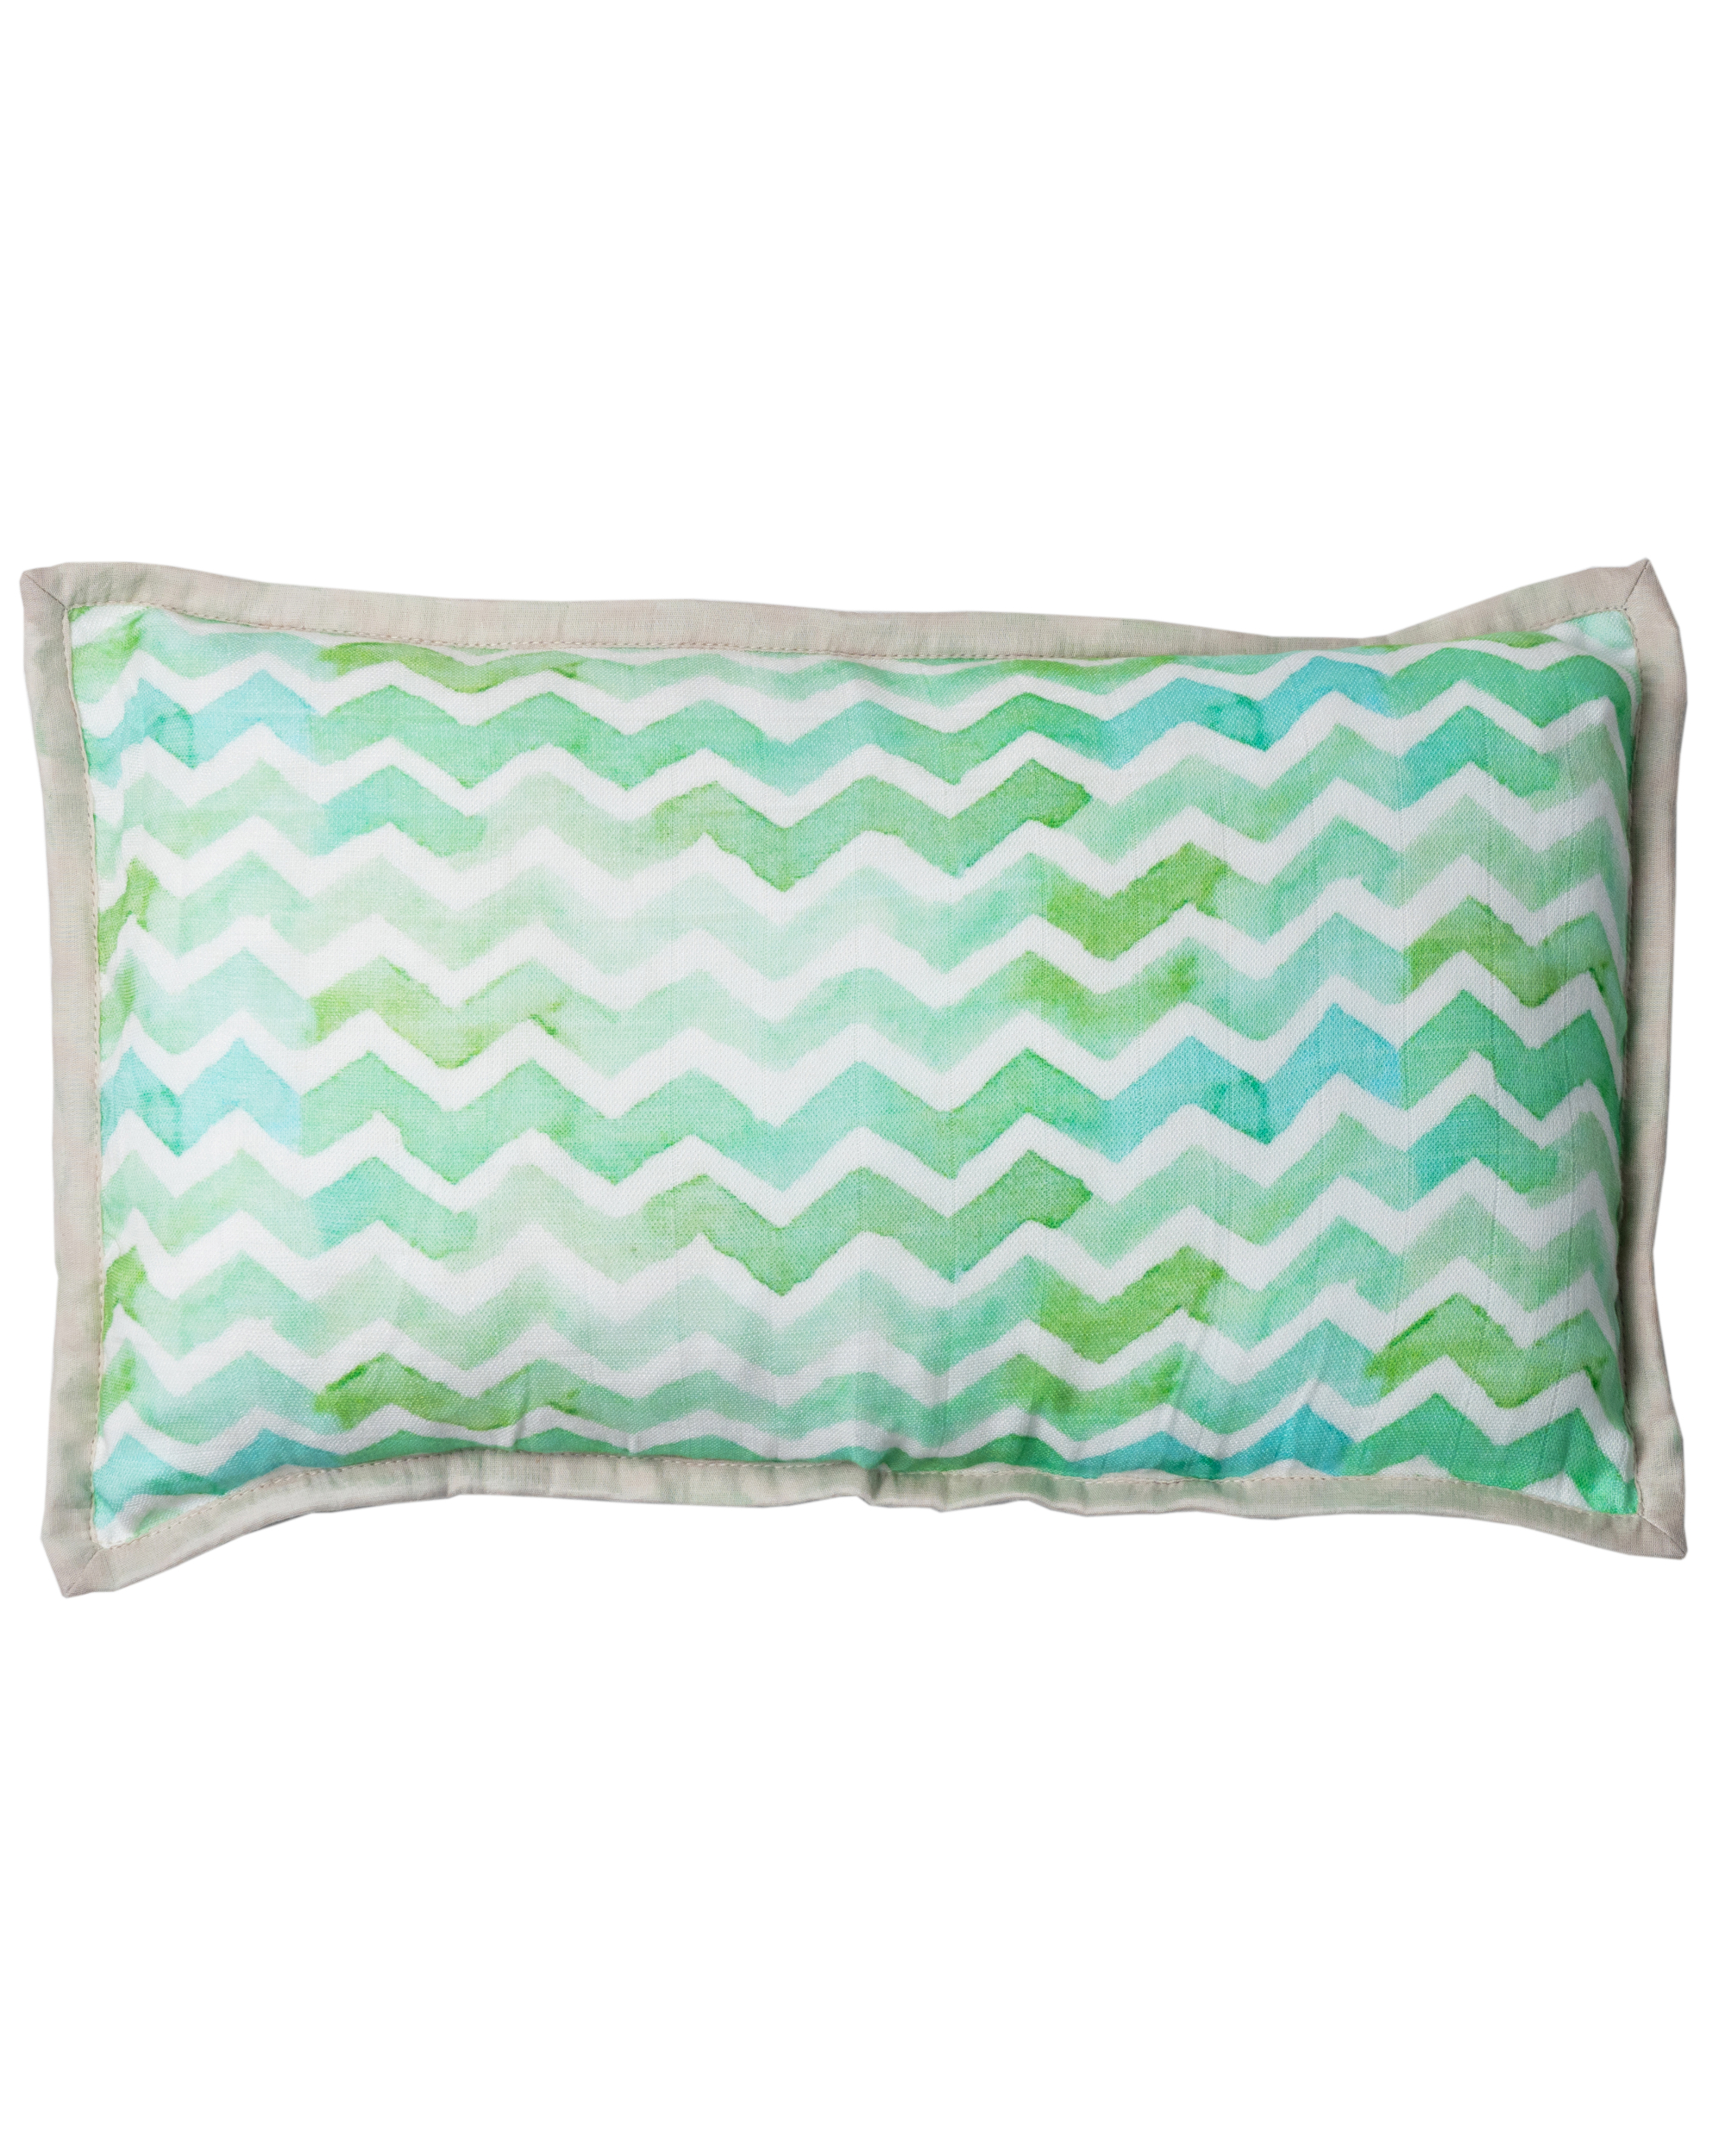 White and green muslin pillow